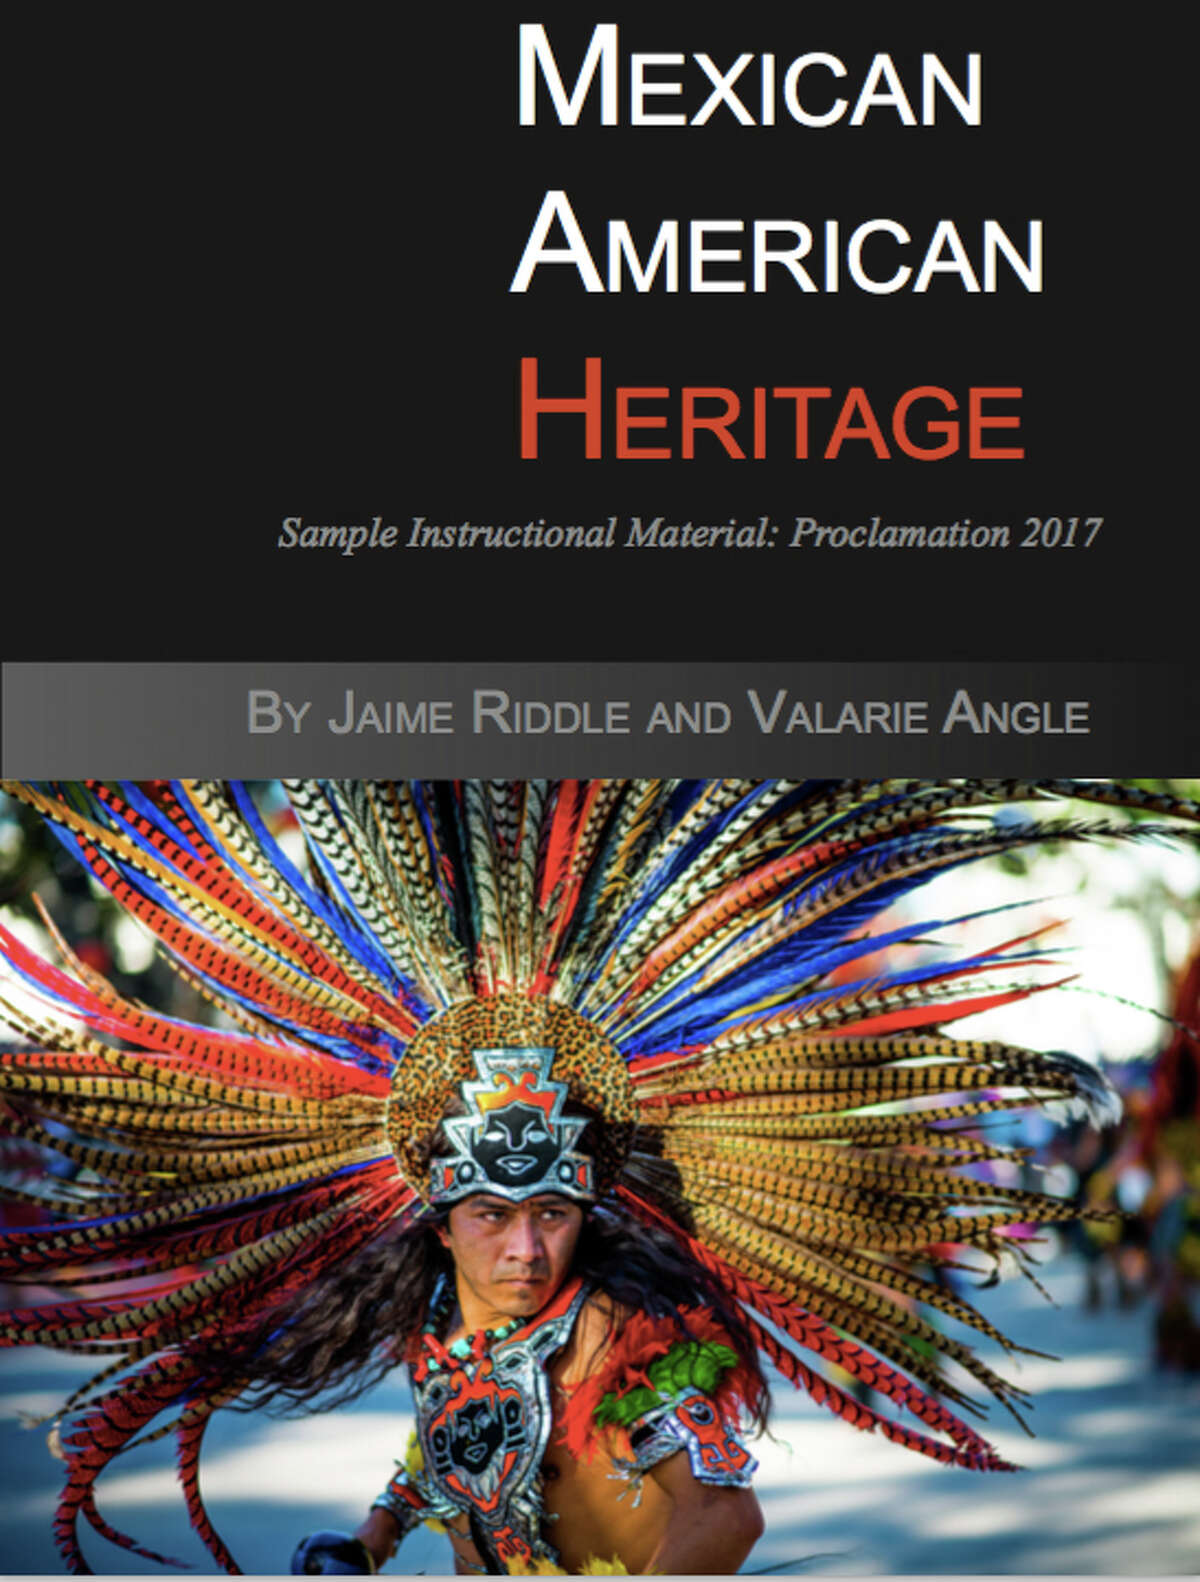 Members of the State Board of Education will decide whether to approve the controversial textbook "Mexican American Heritage" this fall.